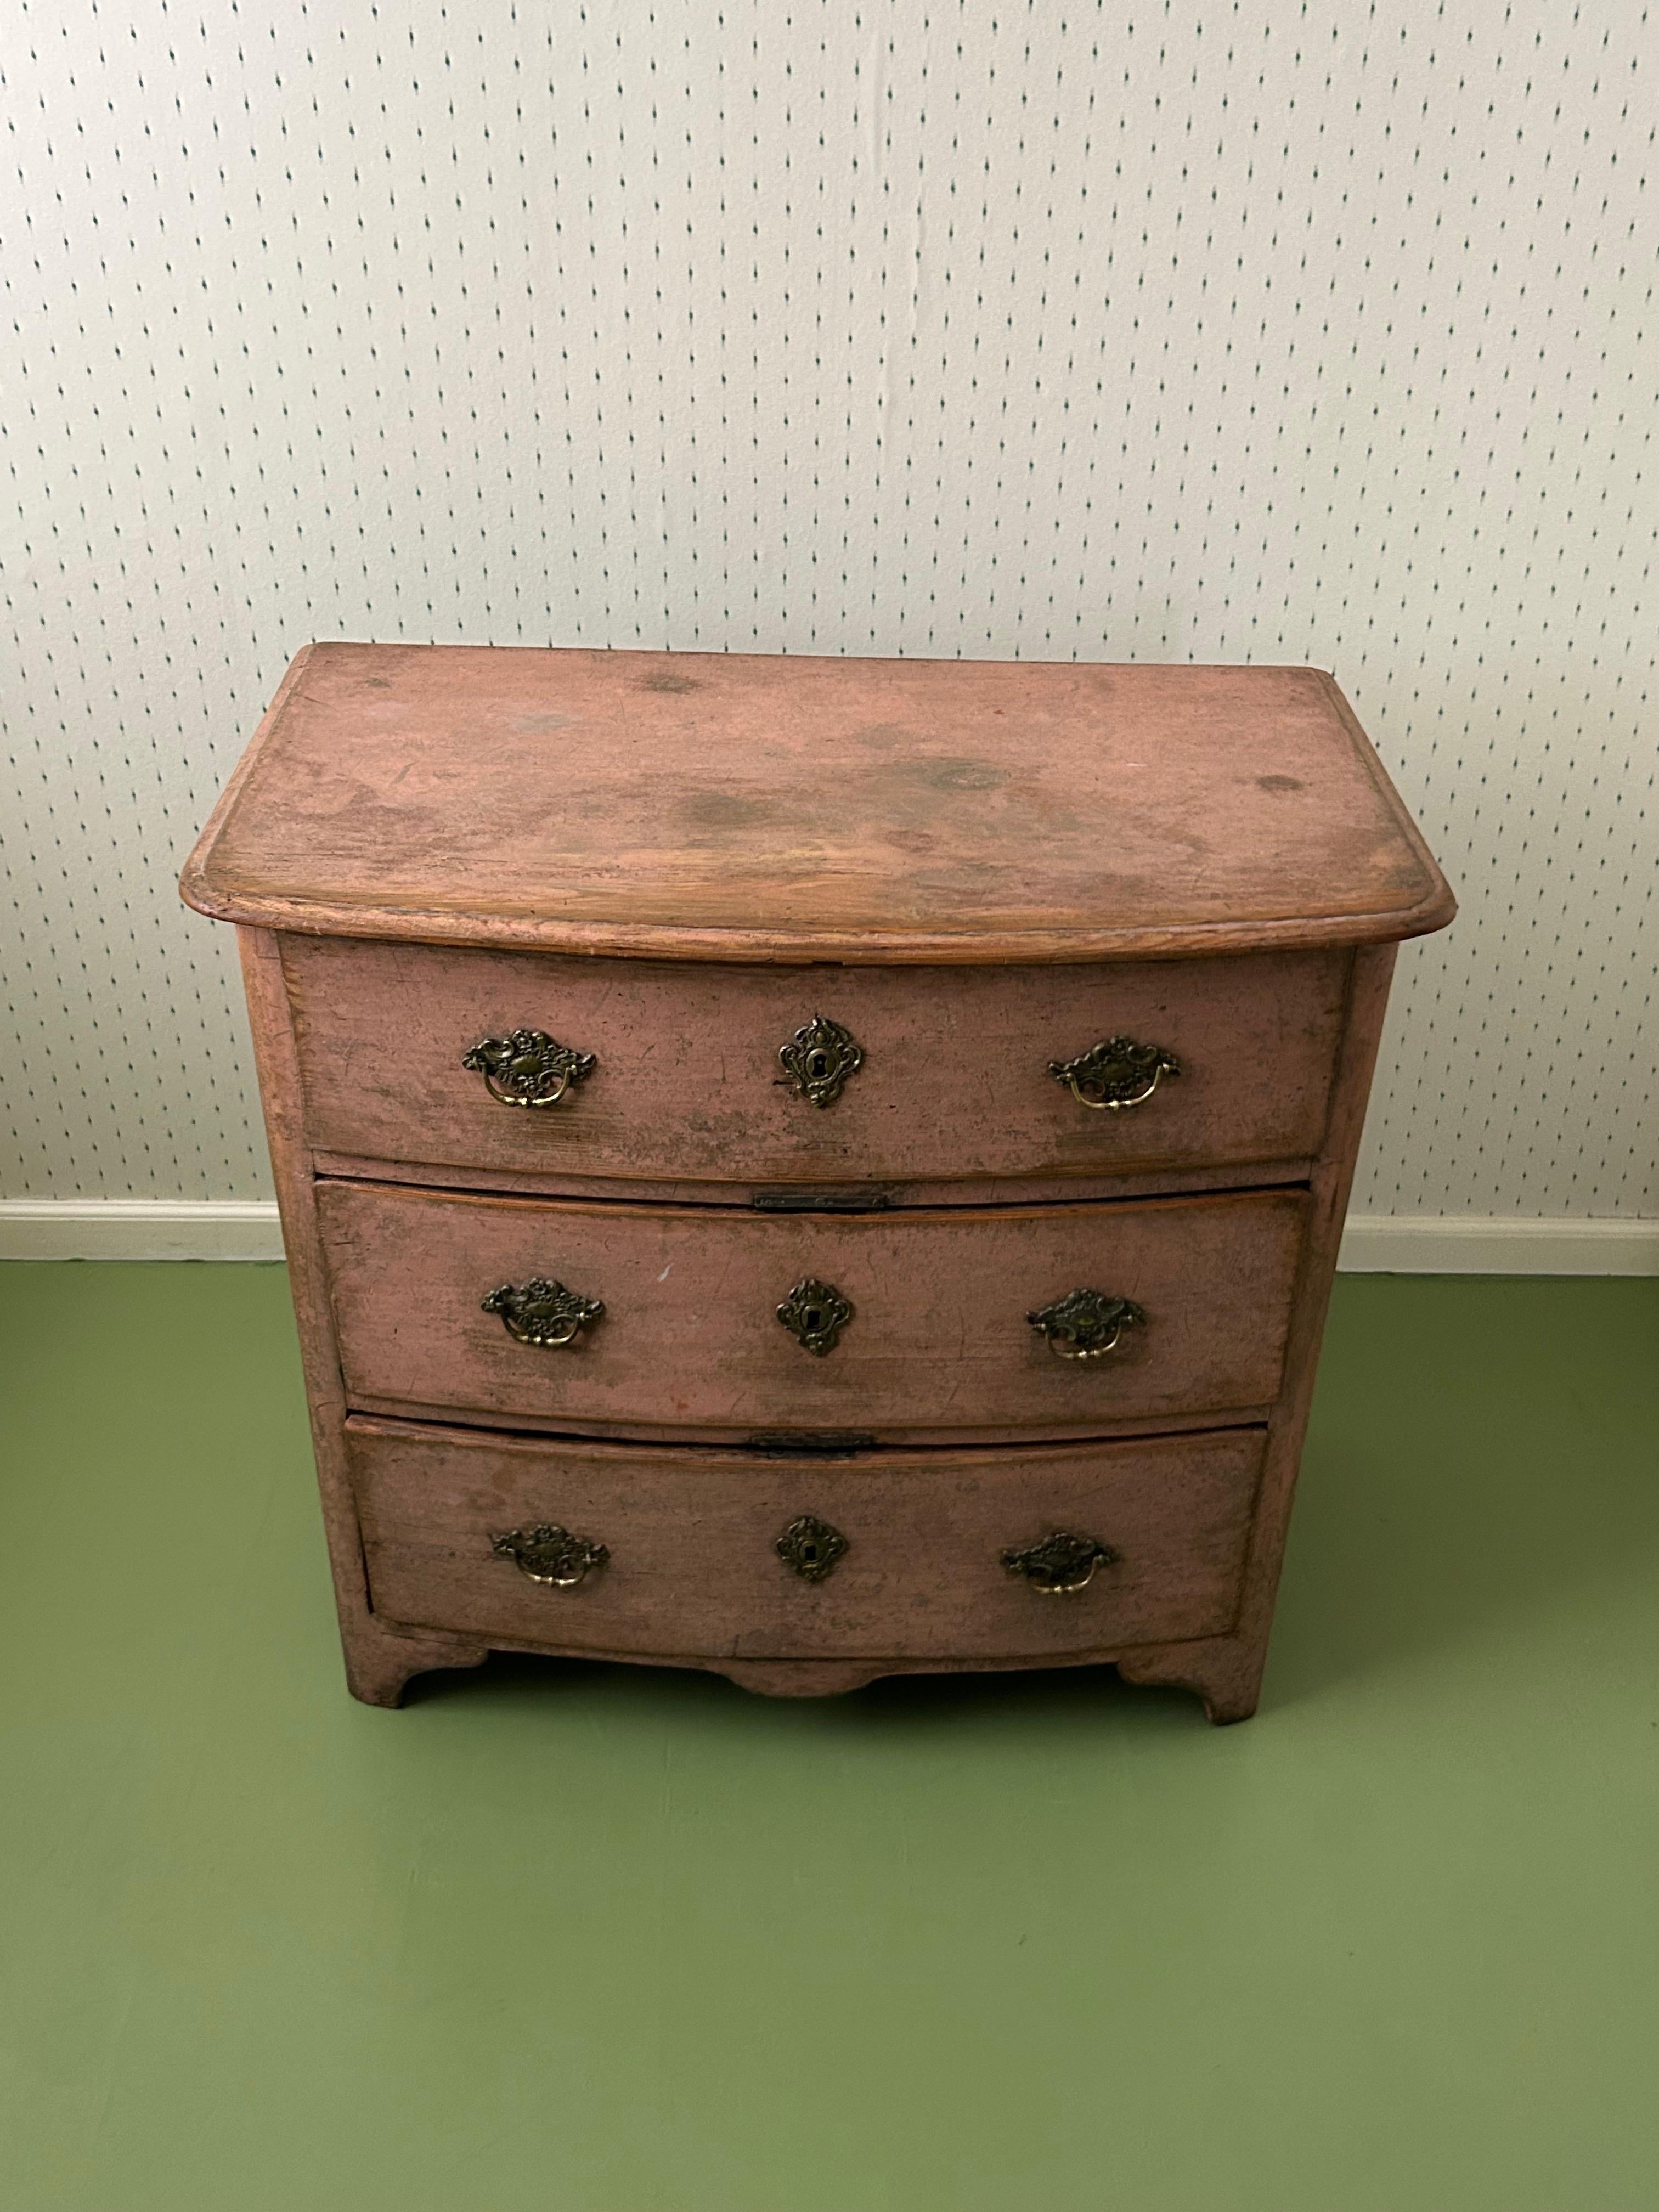  Antique Pink Chest of Drawers in Wood with Original Paint, Sweden, 18th Century For Sale 1